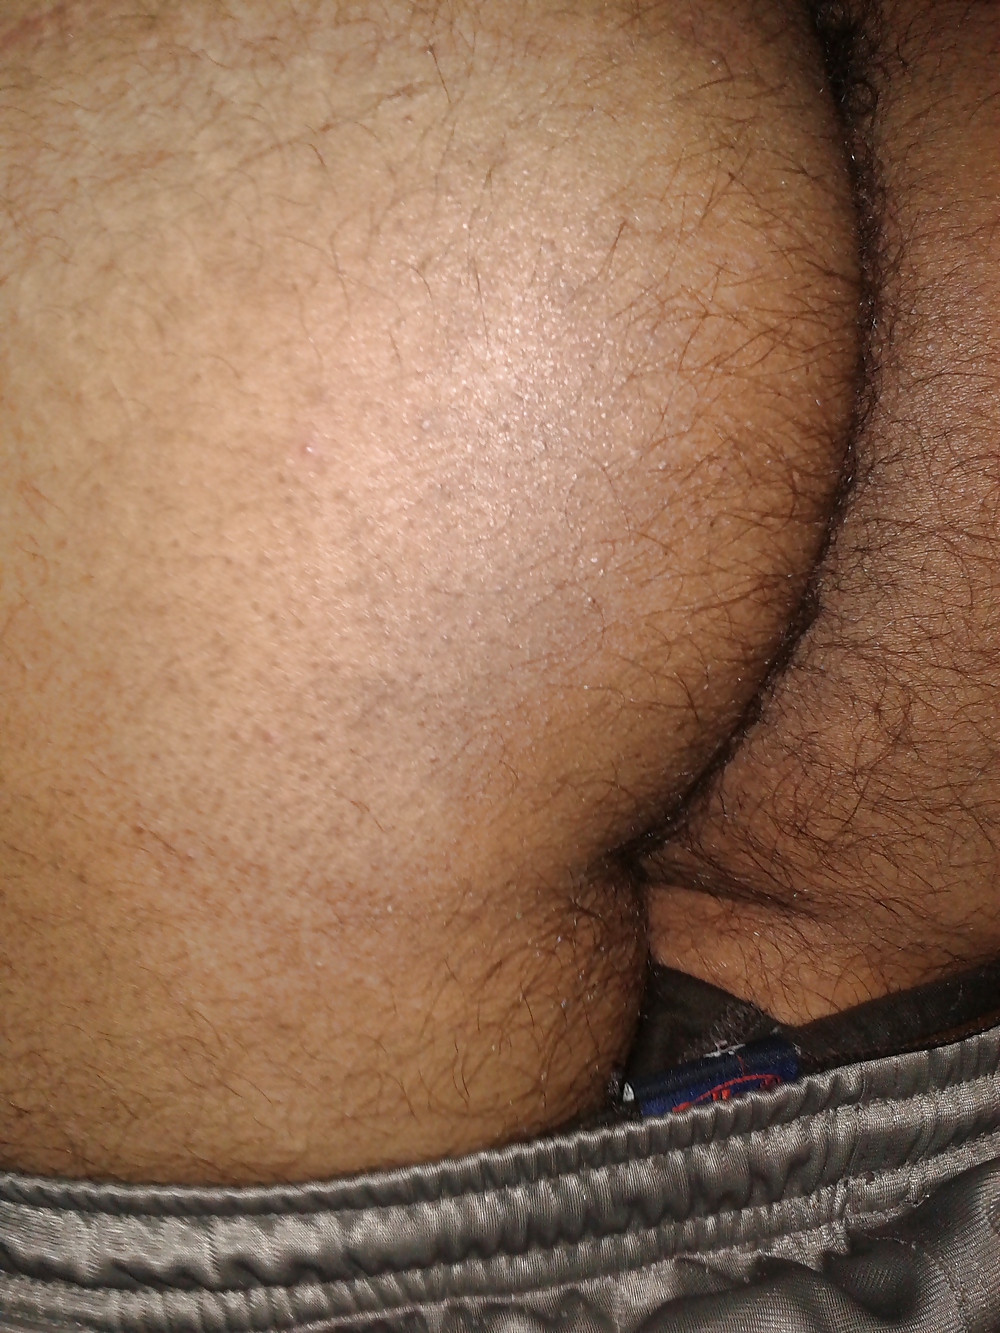 My hairy Ass and close Testicle #16104834